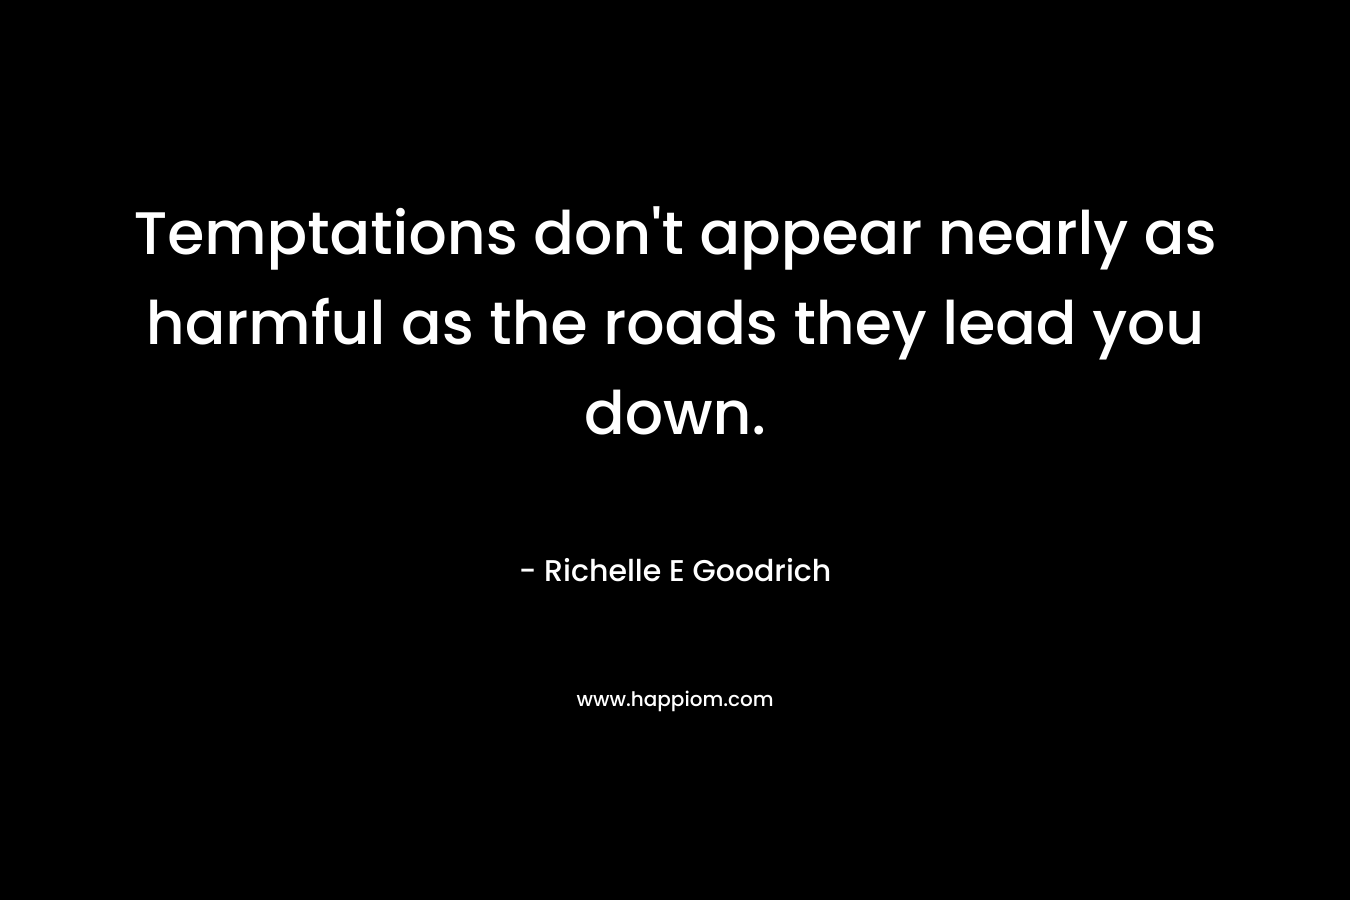 Temptations don’t appear nearly as harmful as the roads they lead you down. – Richelle E Goodrich